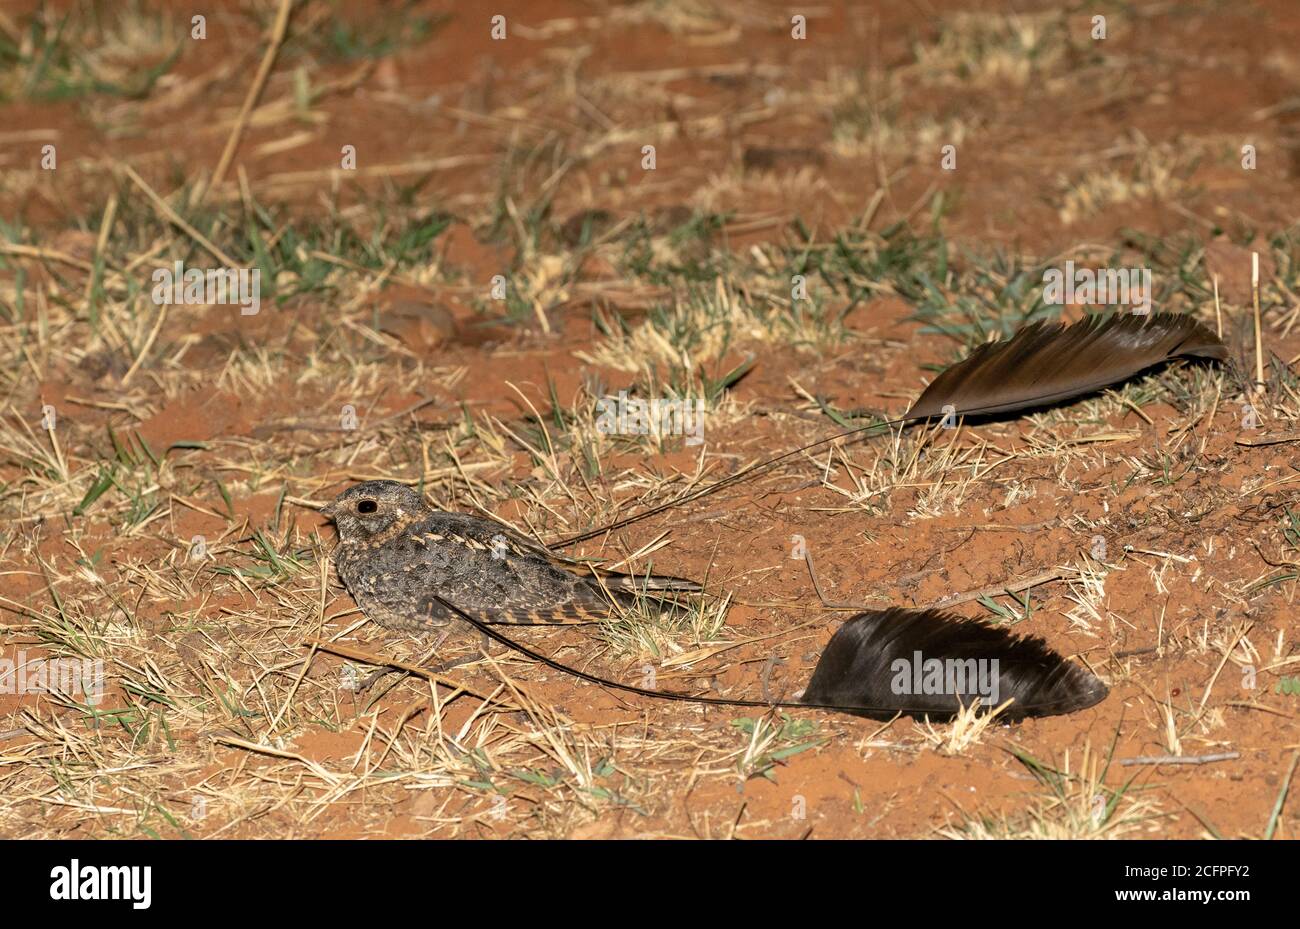 standard-winged nightjar (Caprimulgus longipennis, Macrodipteryx longipennis), Male displaying on the ground, showing its broad central flight Stock Photo